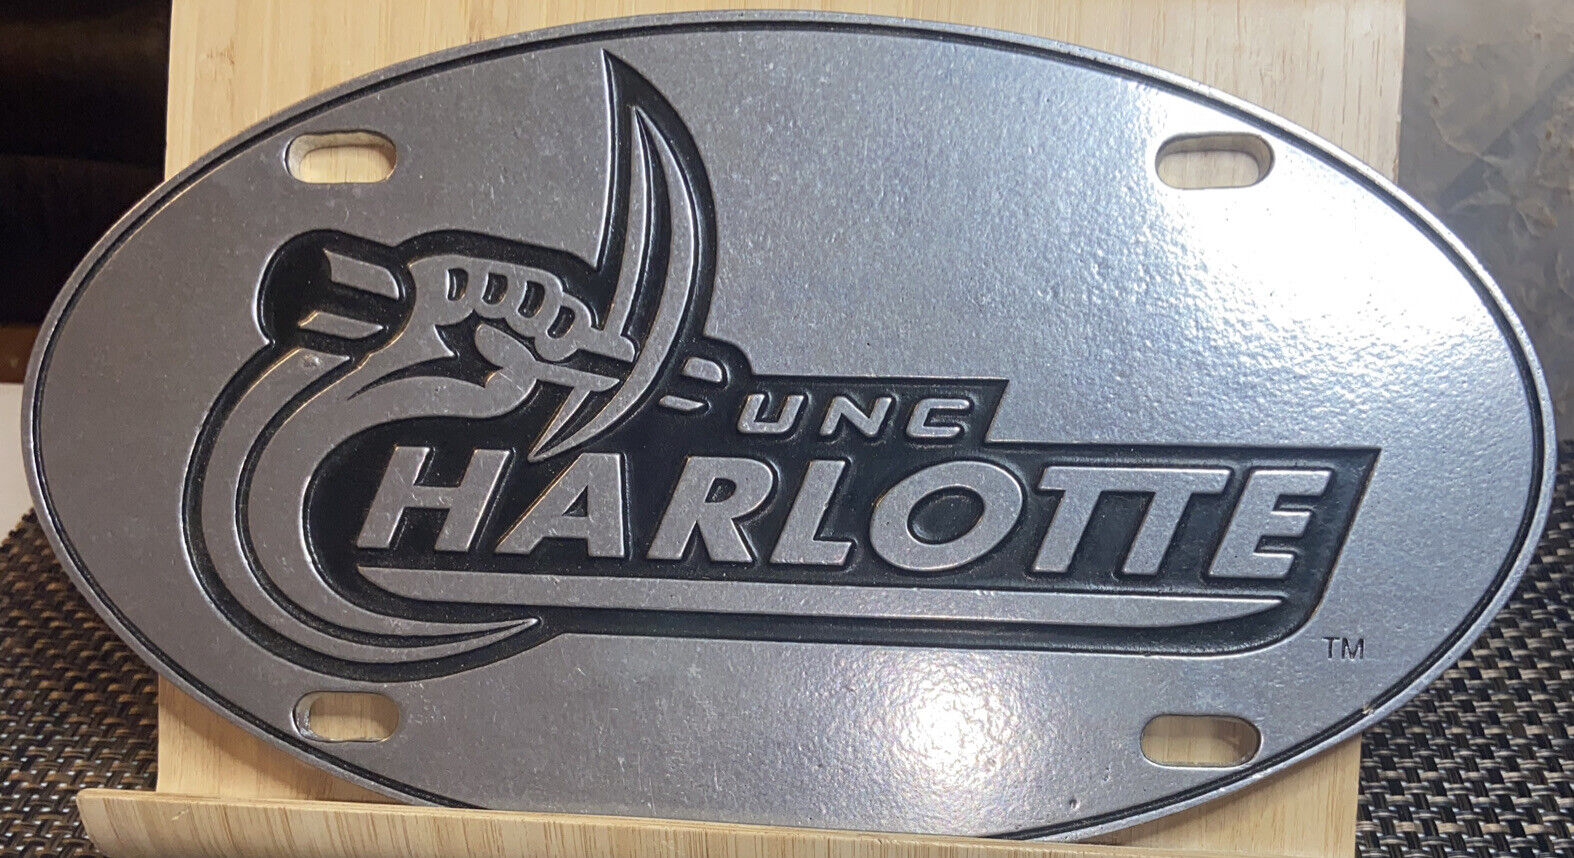 Solid Pewter “UNC” Charlotte Oval License Plate 12-1/2” X 7”